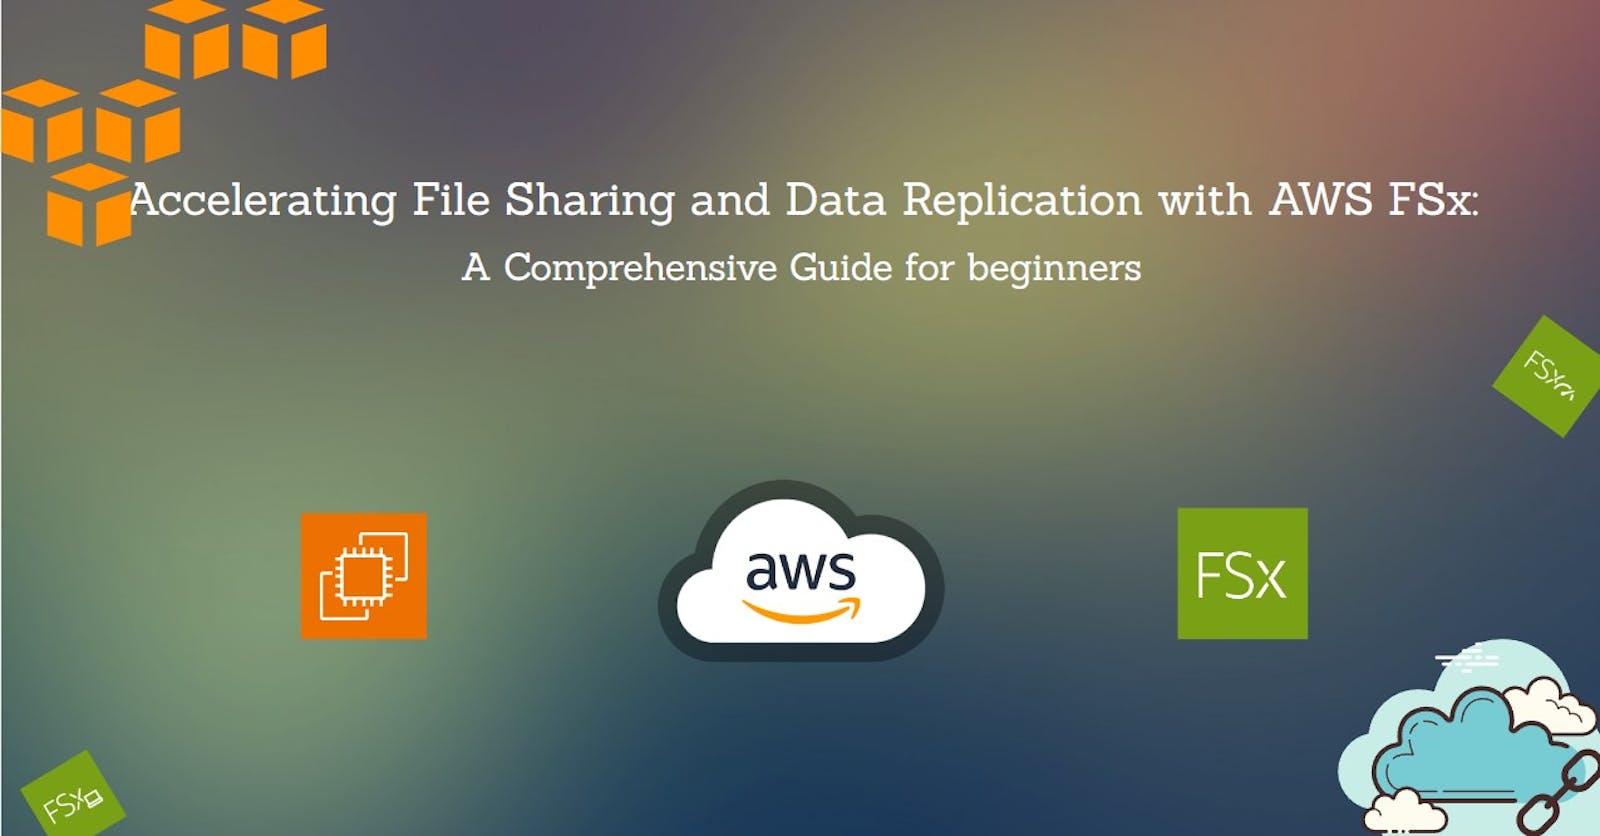 Accelerating File Sharing and Data Replication with AWS FSx: A Comprehensive Guide for beginners